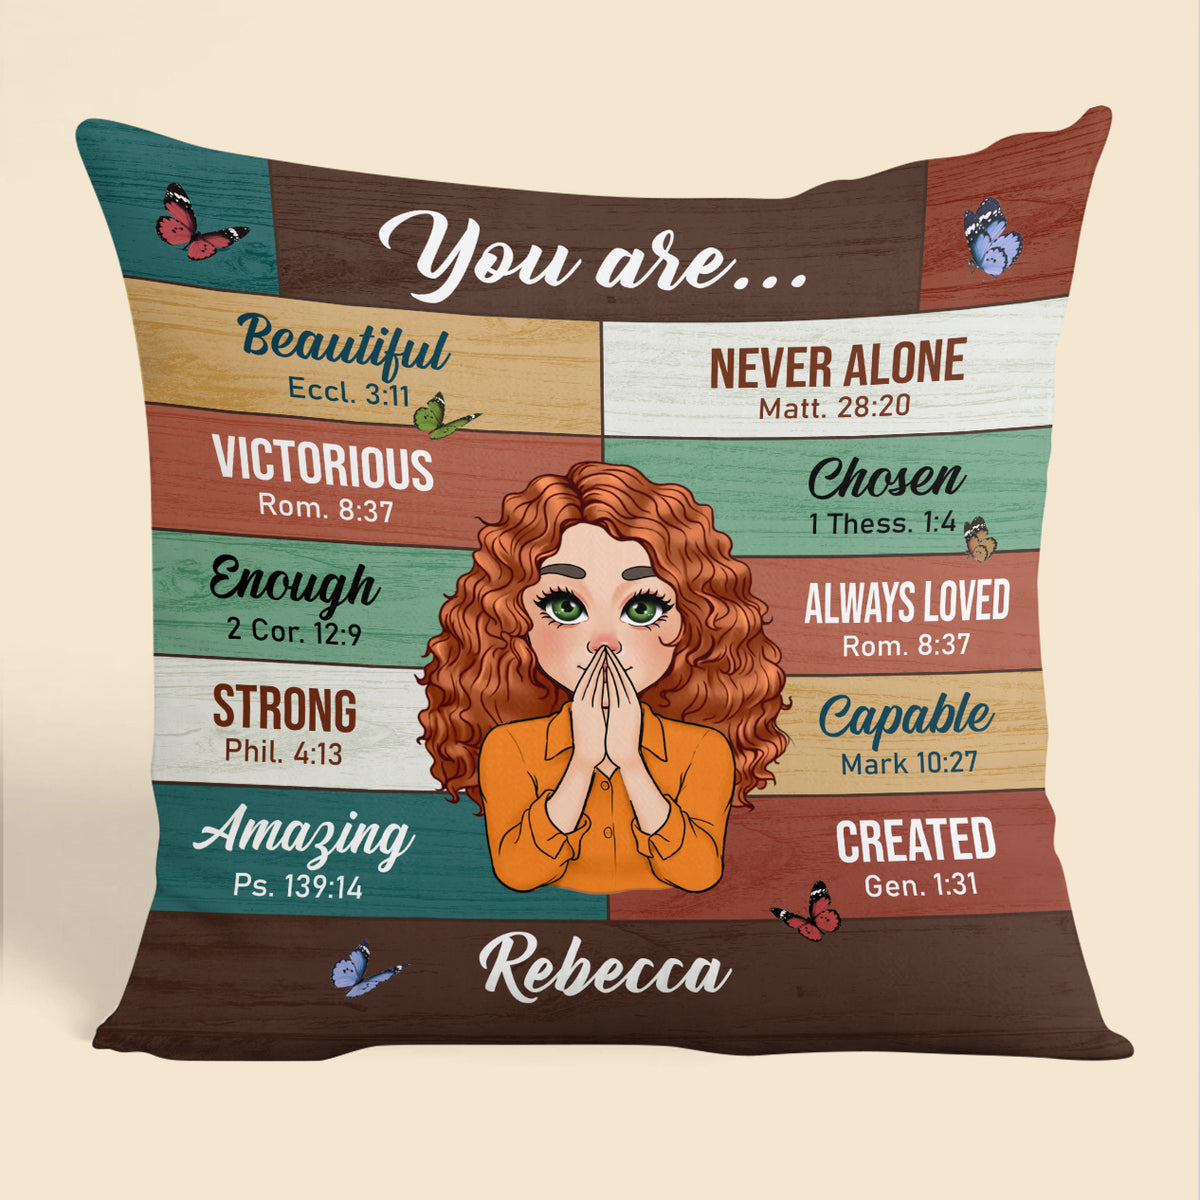 You Are Beautiful (Version 2) - Personalized Pillow - Best Gift For Mother, Daughter, Sister, Friend, Wife - Giftago